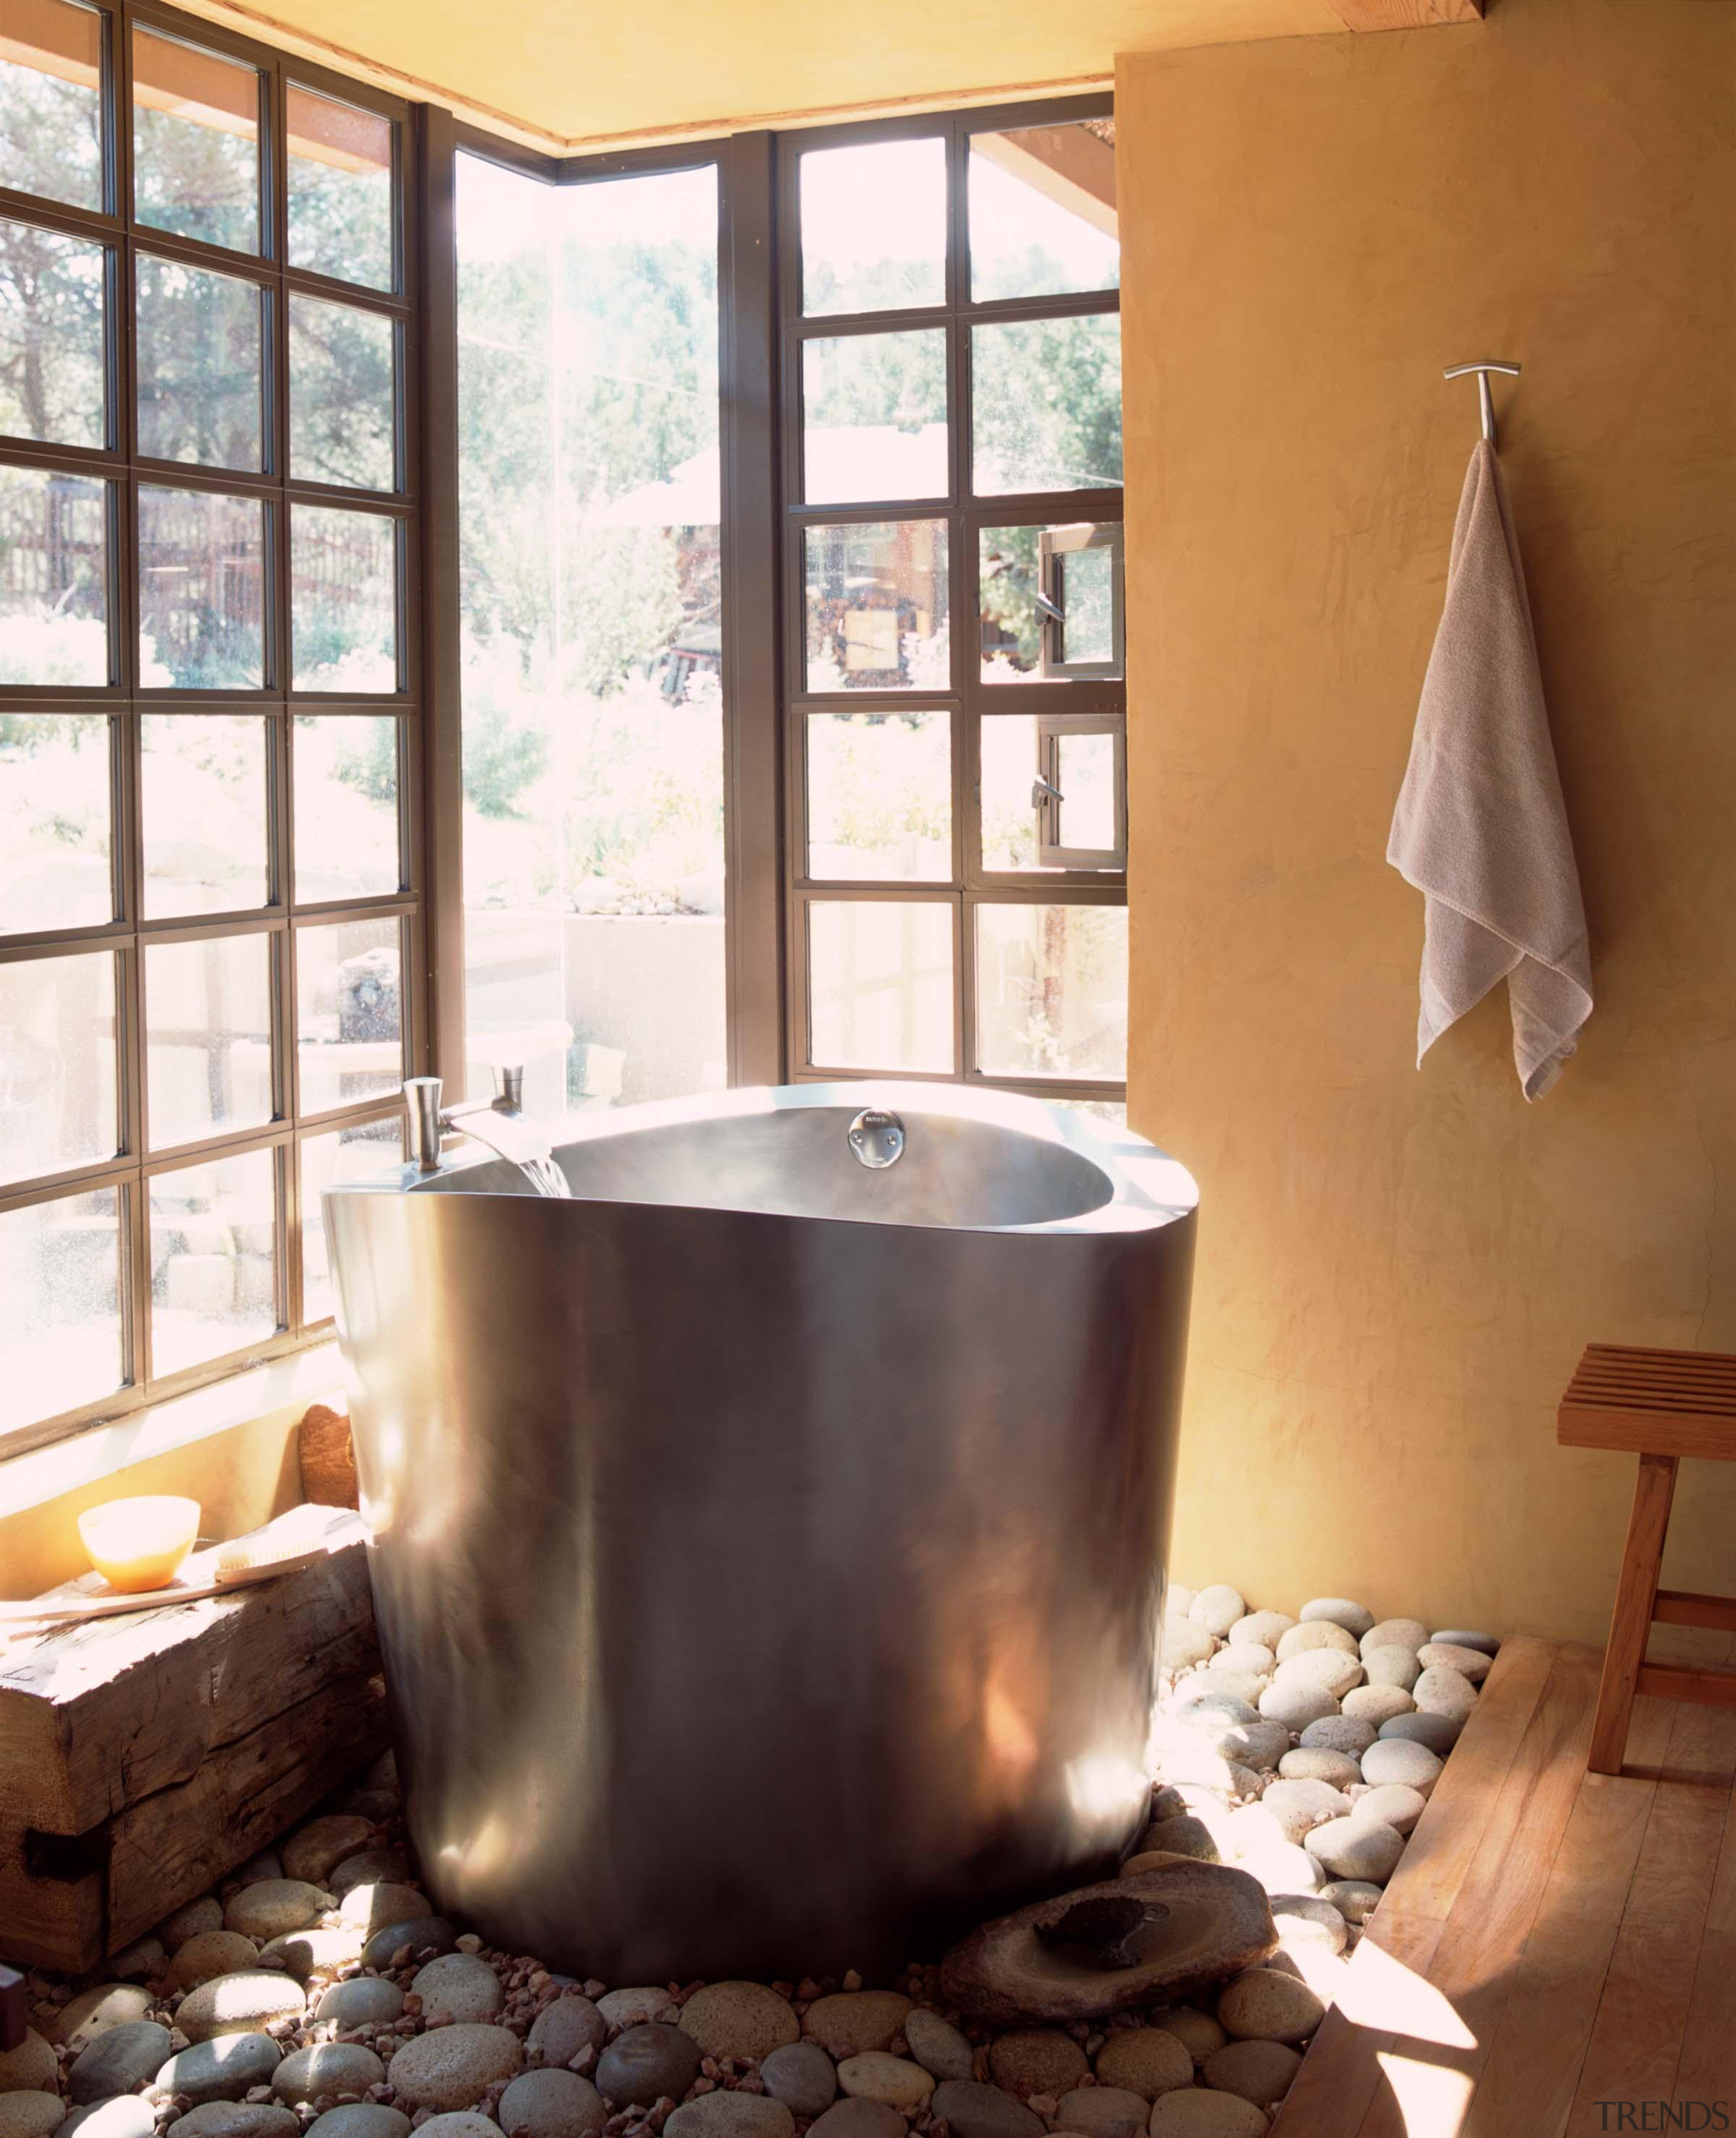 Japanese Style Soaking Tub You Ll Love, Japanese Soaking Tubs For Small Bathrooms